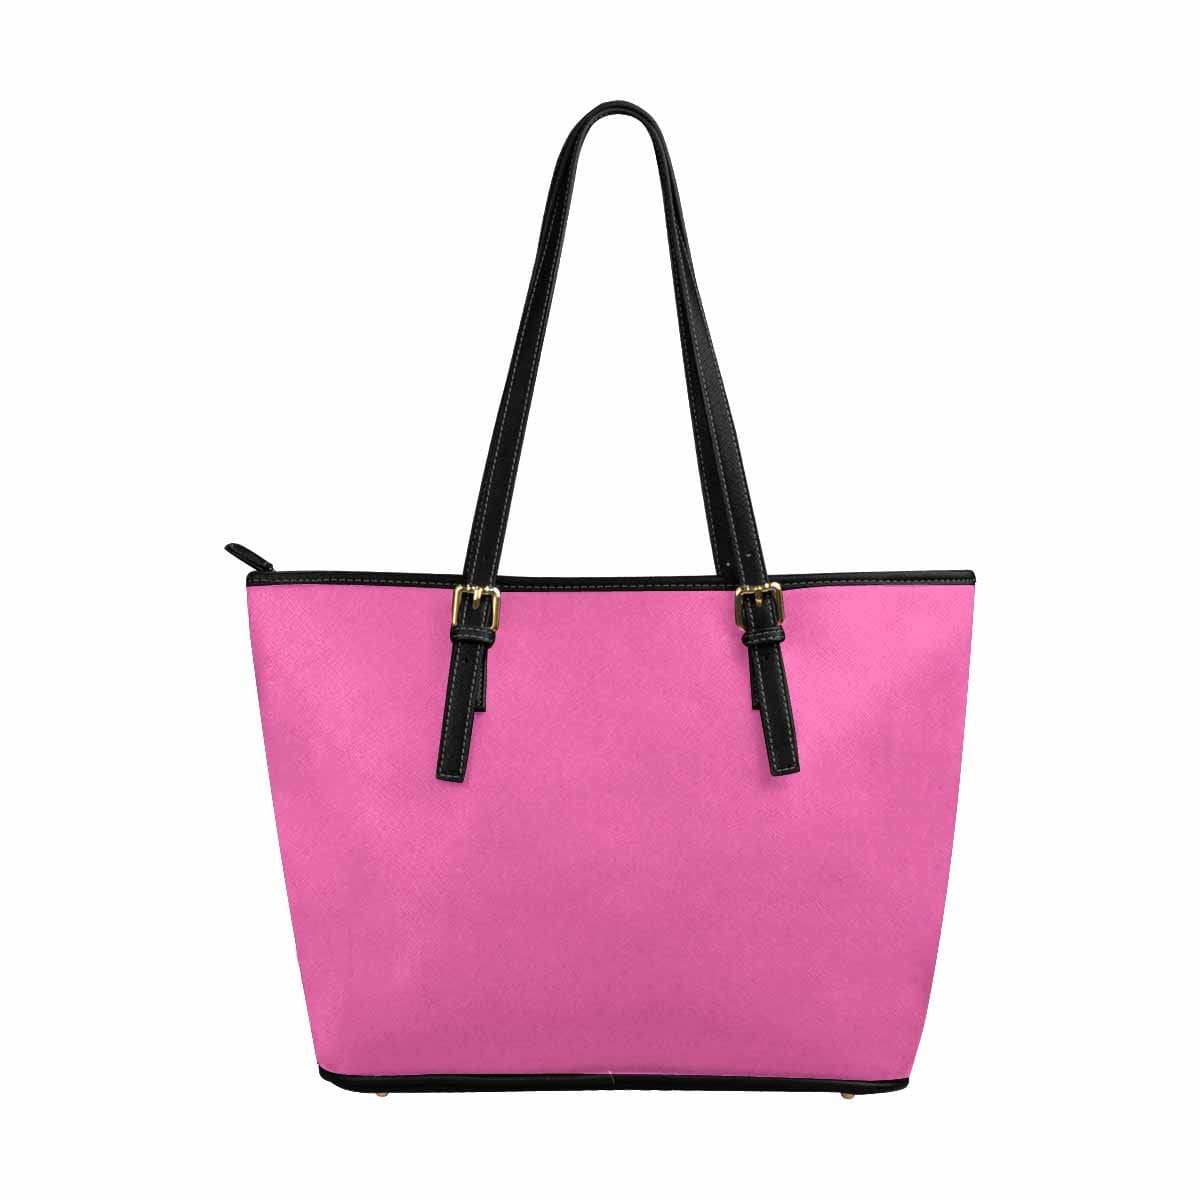 Large Leather Tote Shoulder Bag - Hot Pink - Bags | Leather Tote Bags